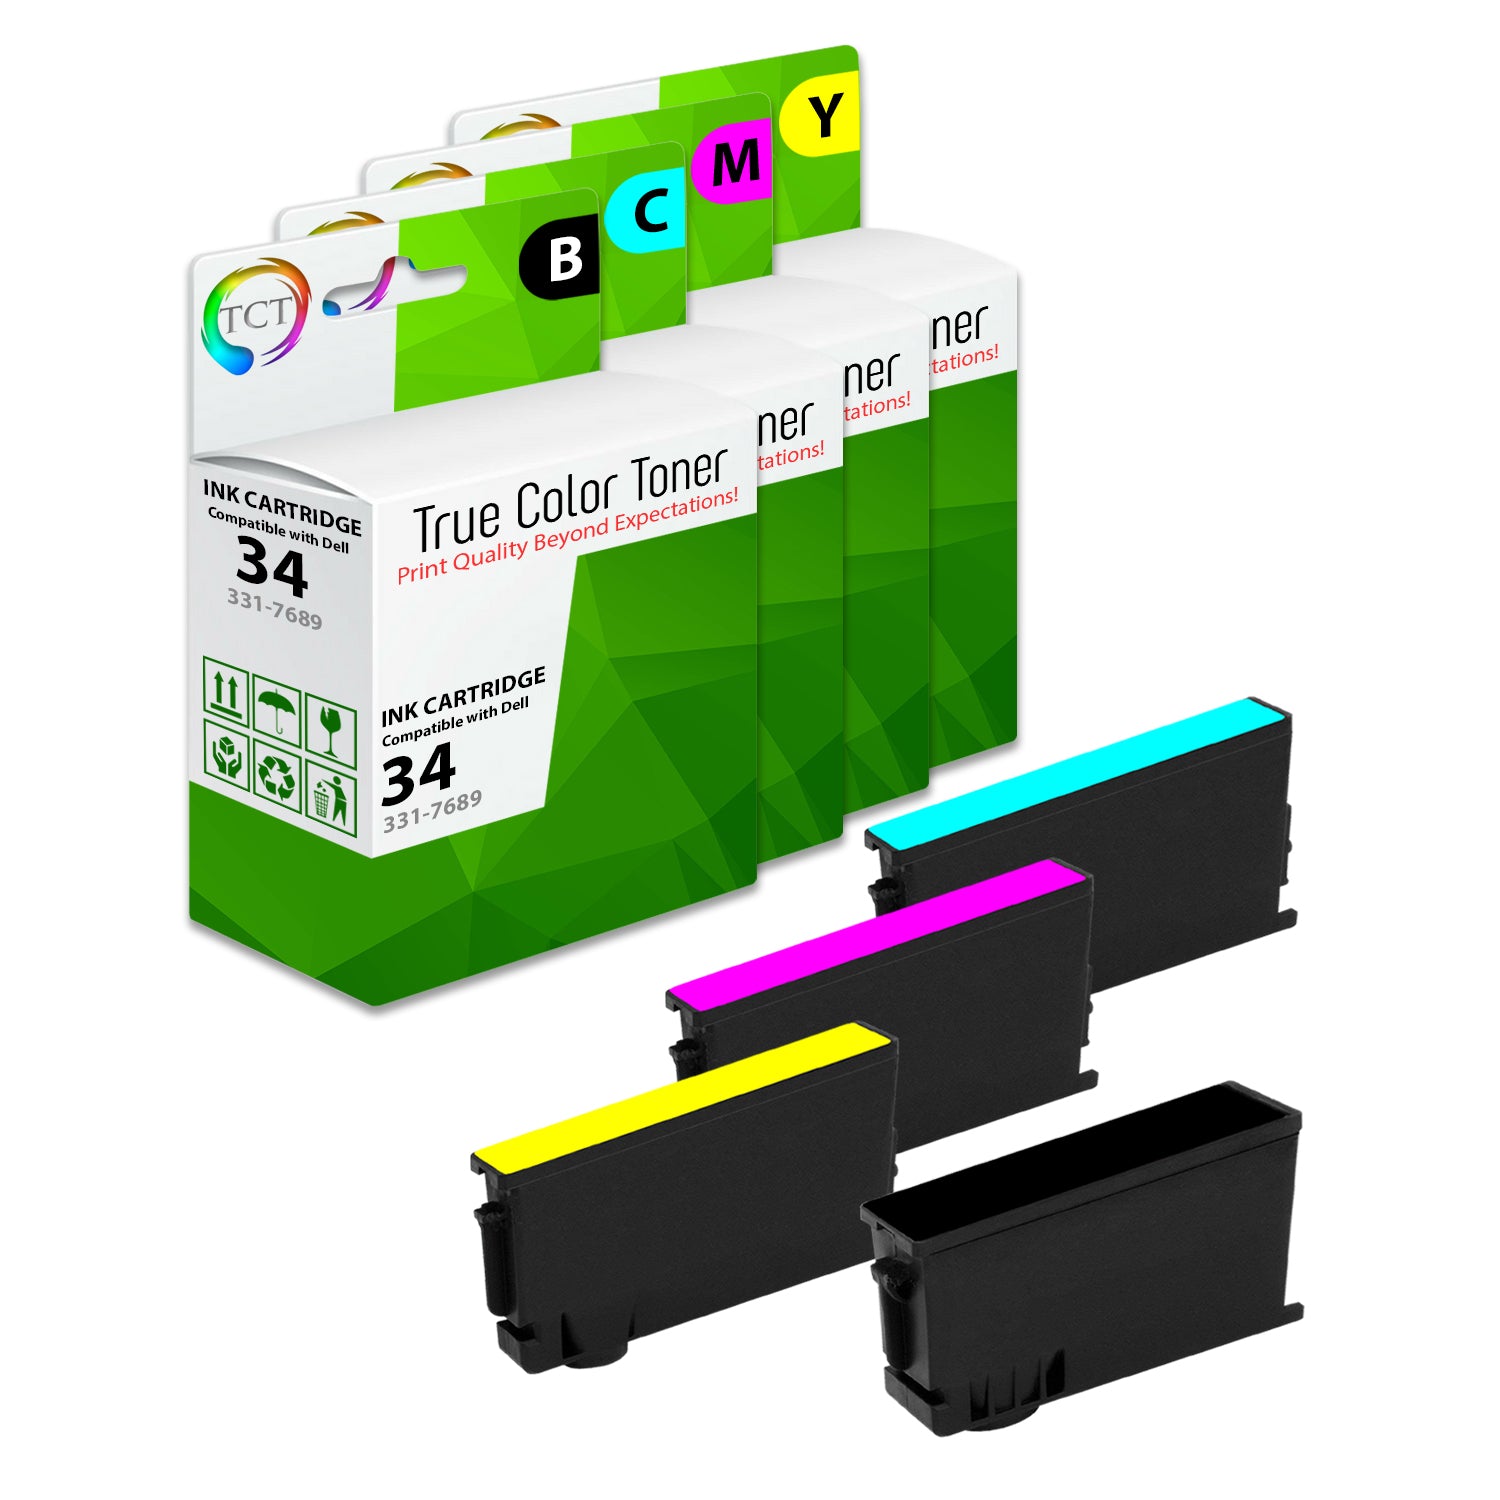 TCT Compatible Ink Cartridge Replacement for the Dell 34 Series Series - 4 Pack (B, C, M, Y)